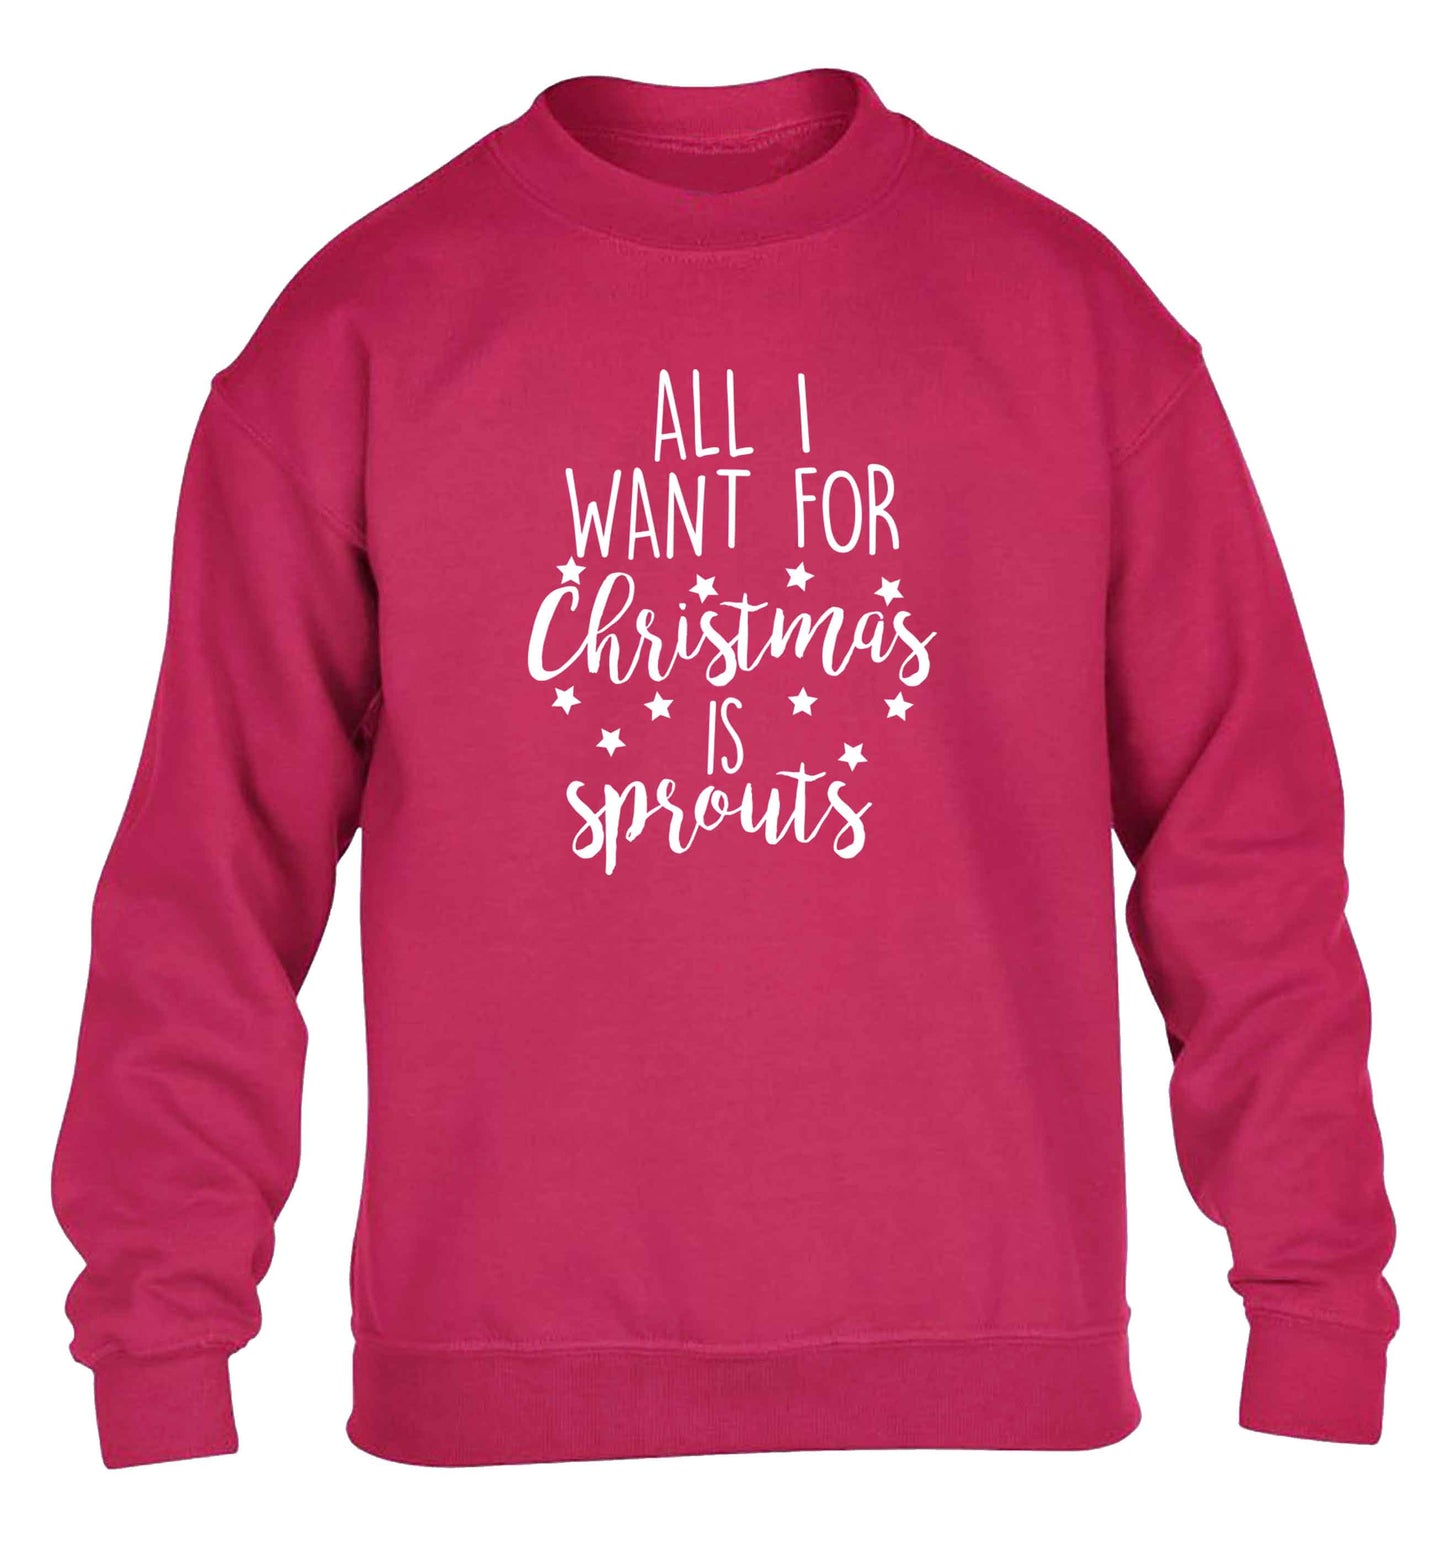 All I want for Christmas is sprouts children's pink sweater 12-13 Years